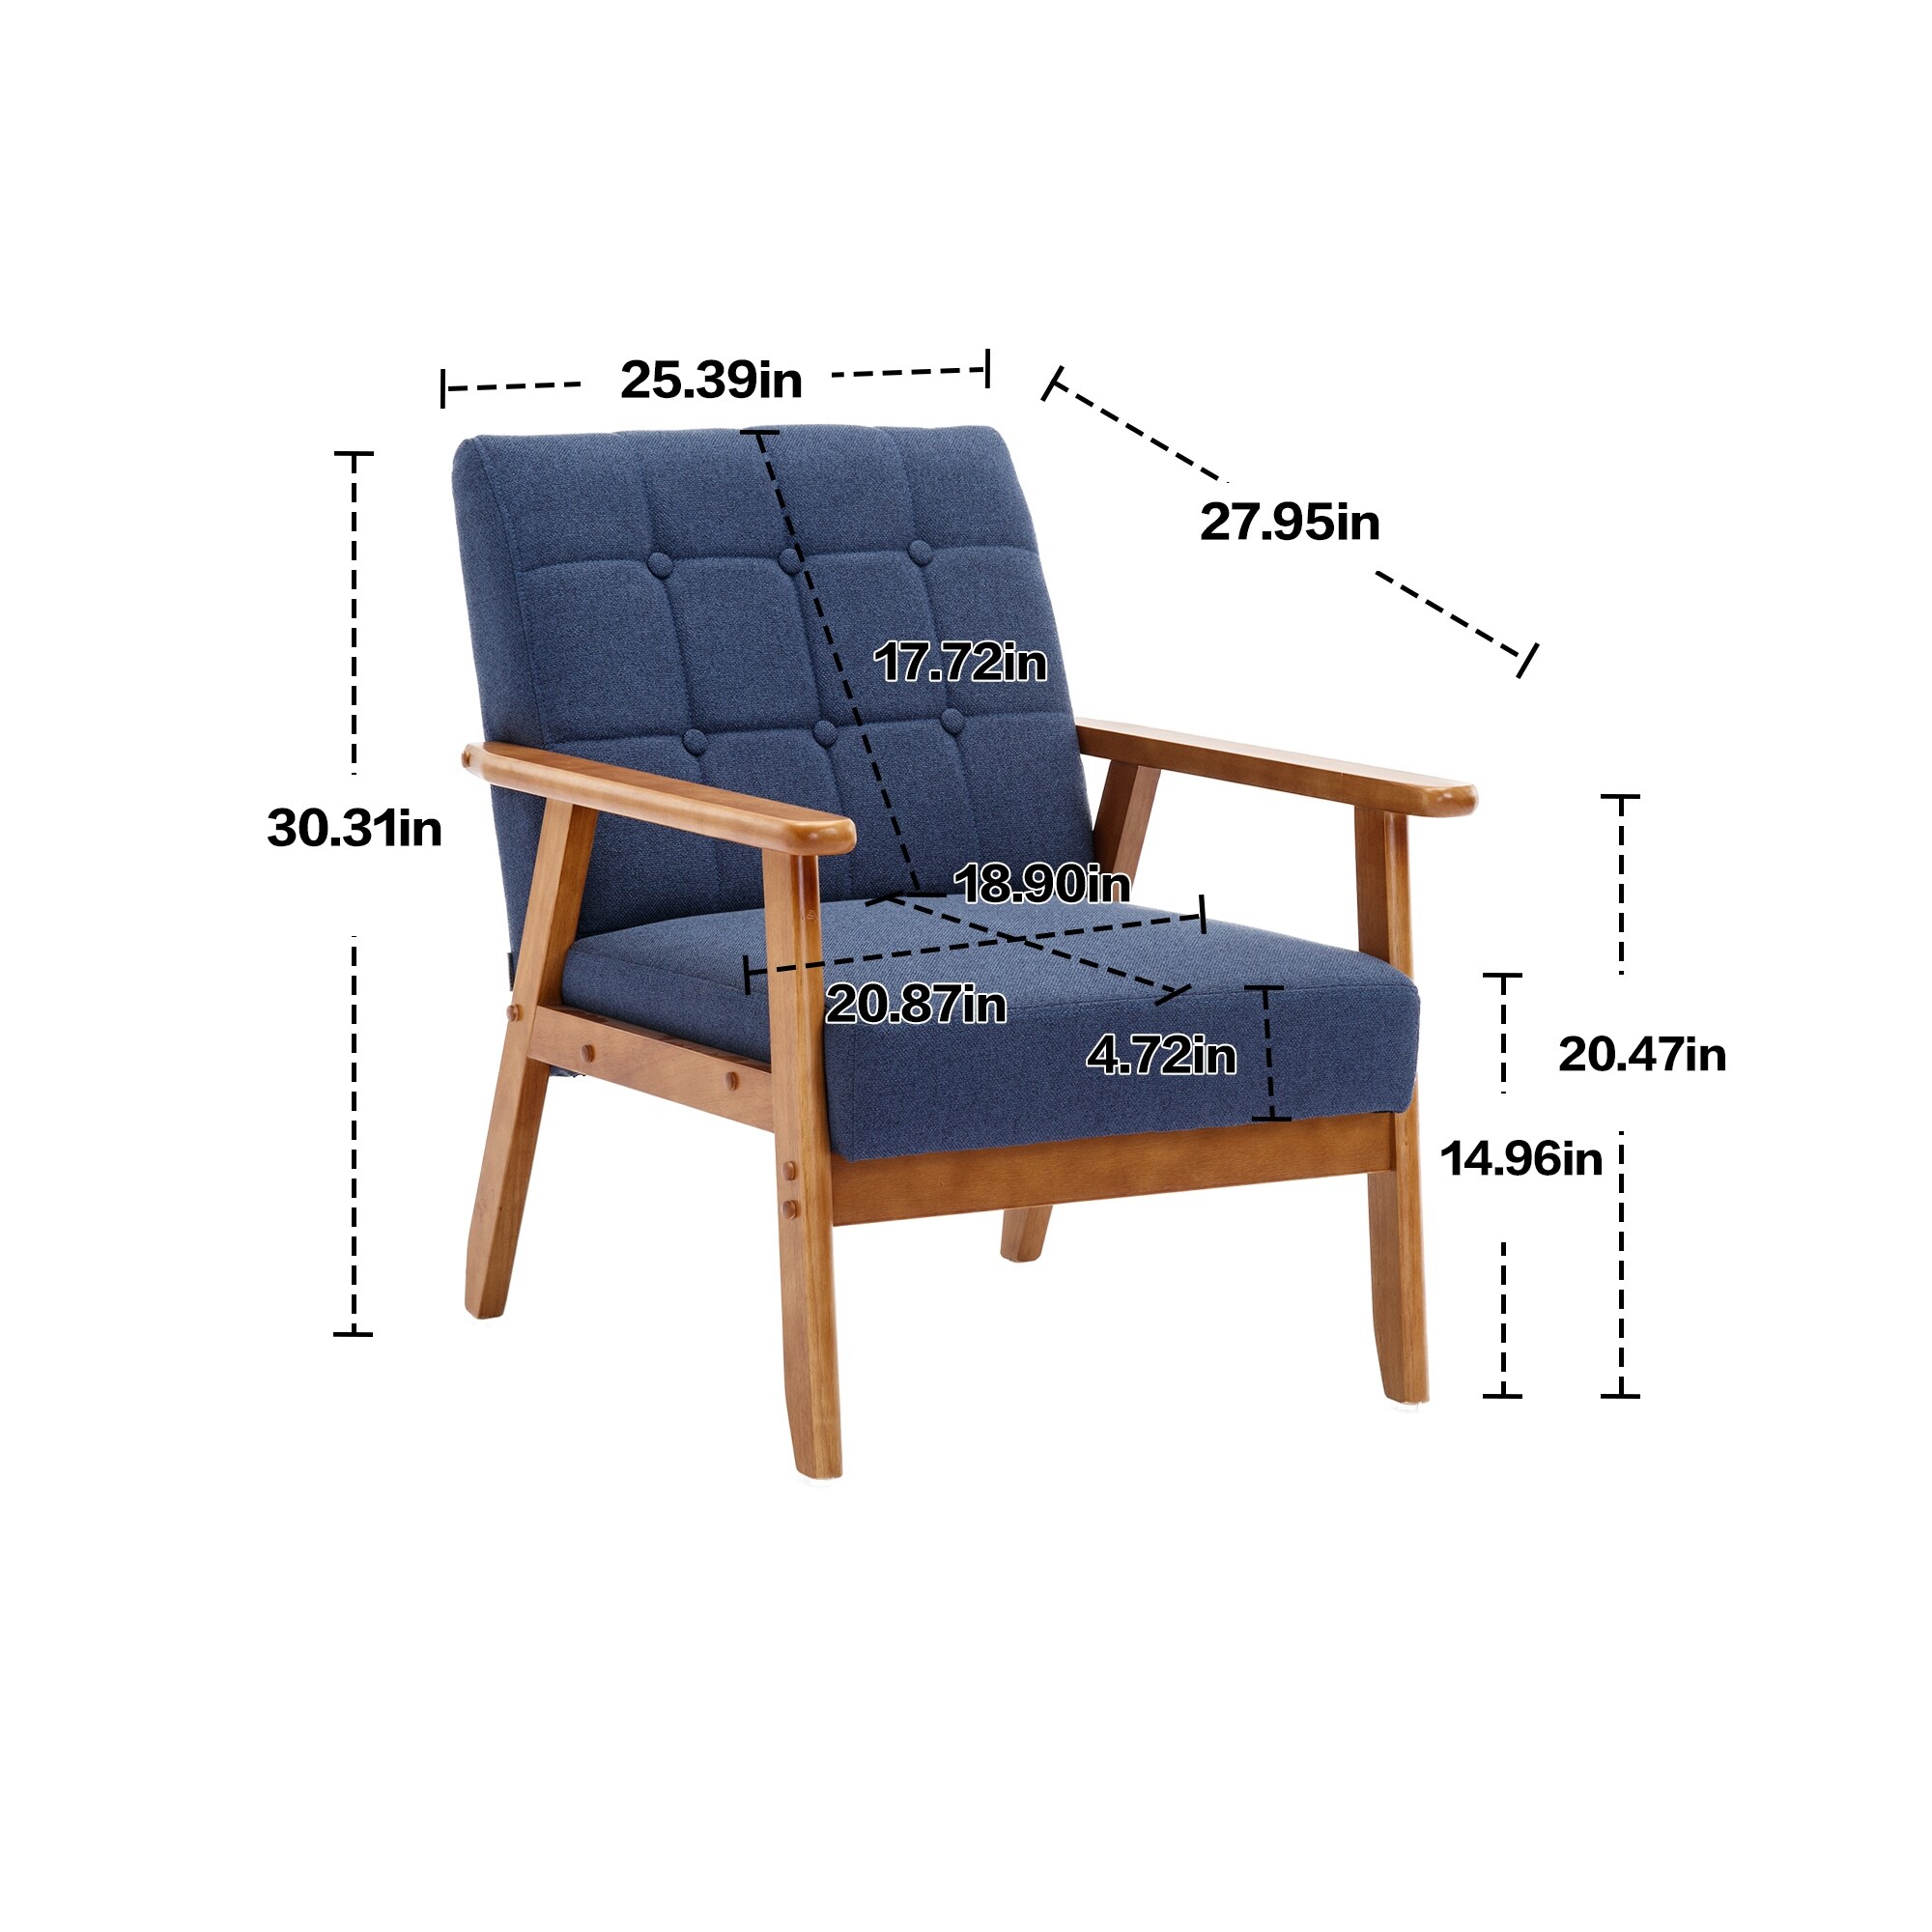 Leisure Chair with Solid Wood Armrest and Feet, Mid Century Modern Accent chair, for Living Room Bedroom Studio chair